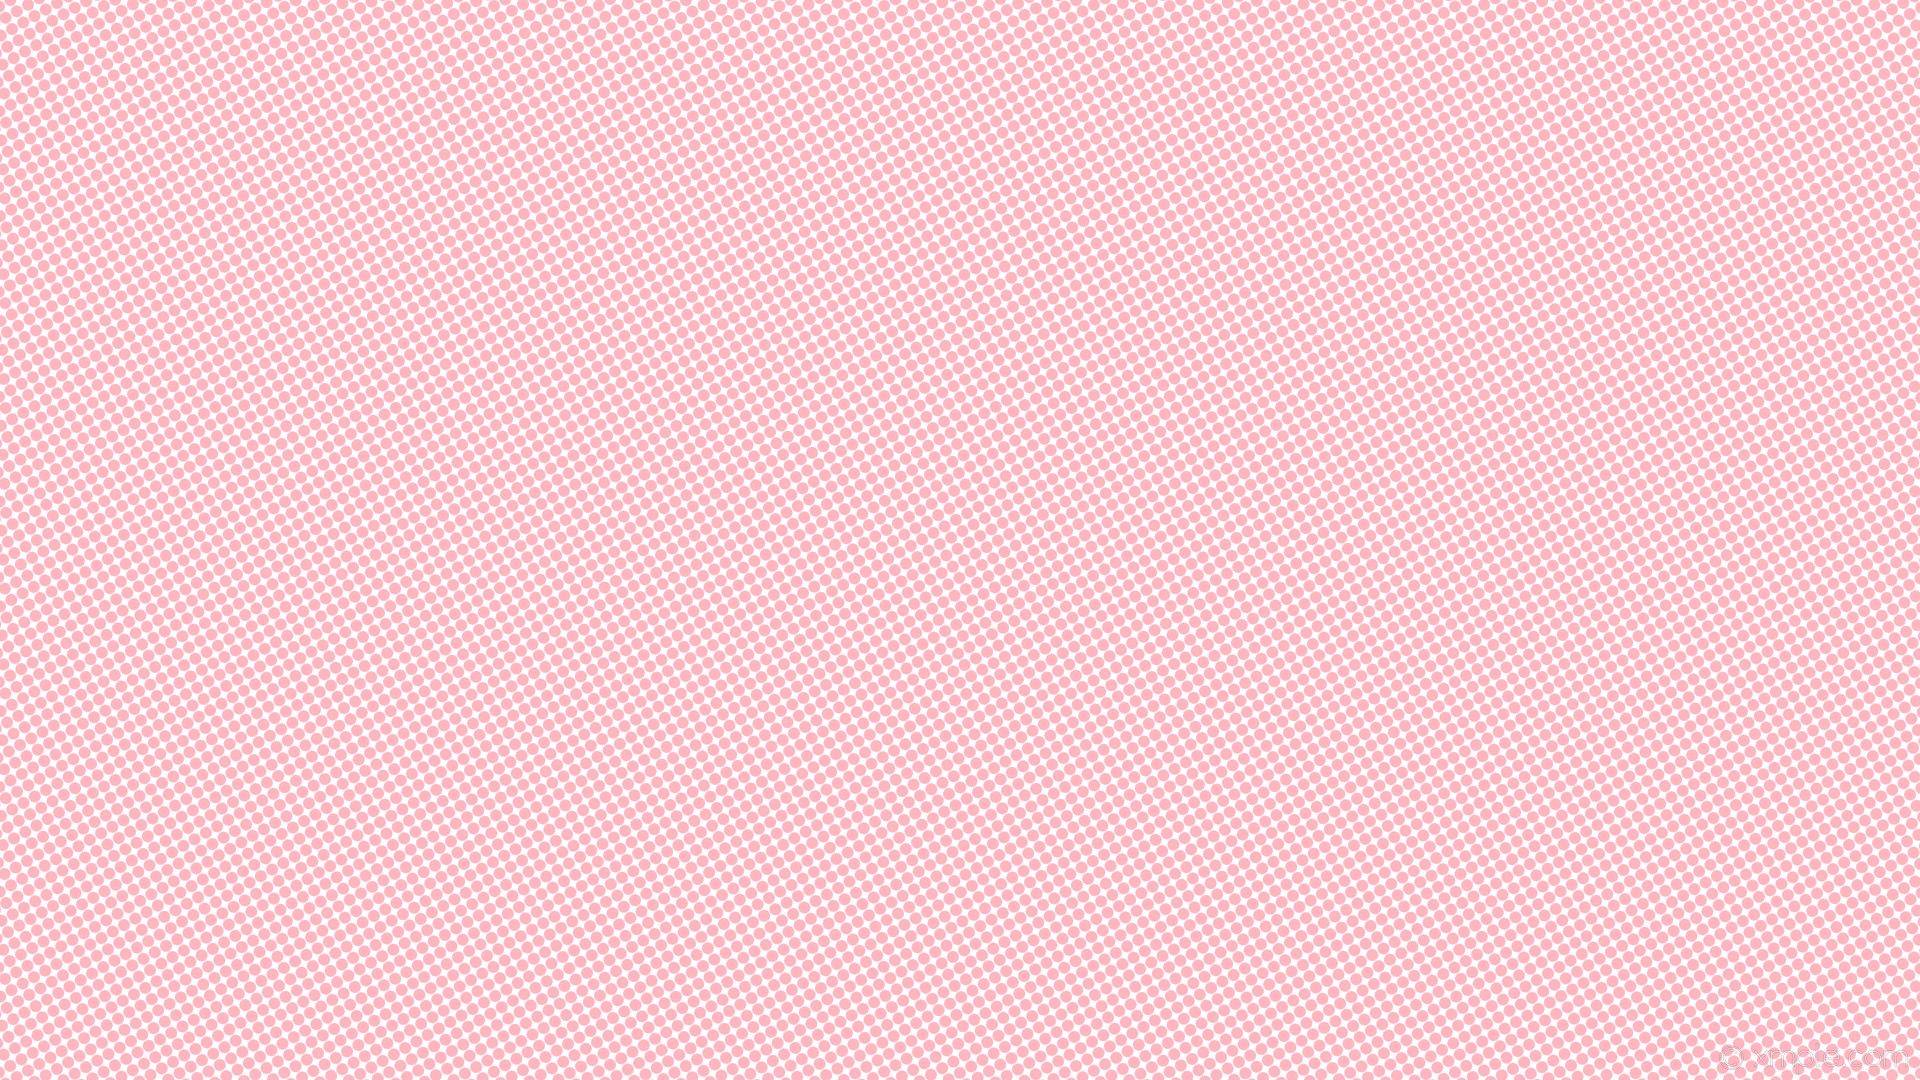 A pink striped background with white lines - Soft pink